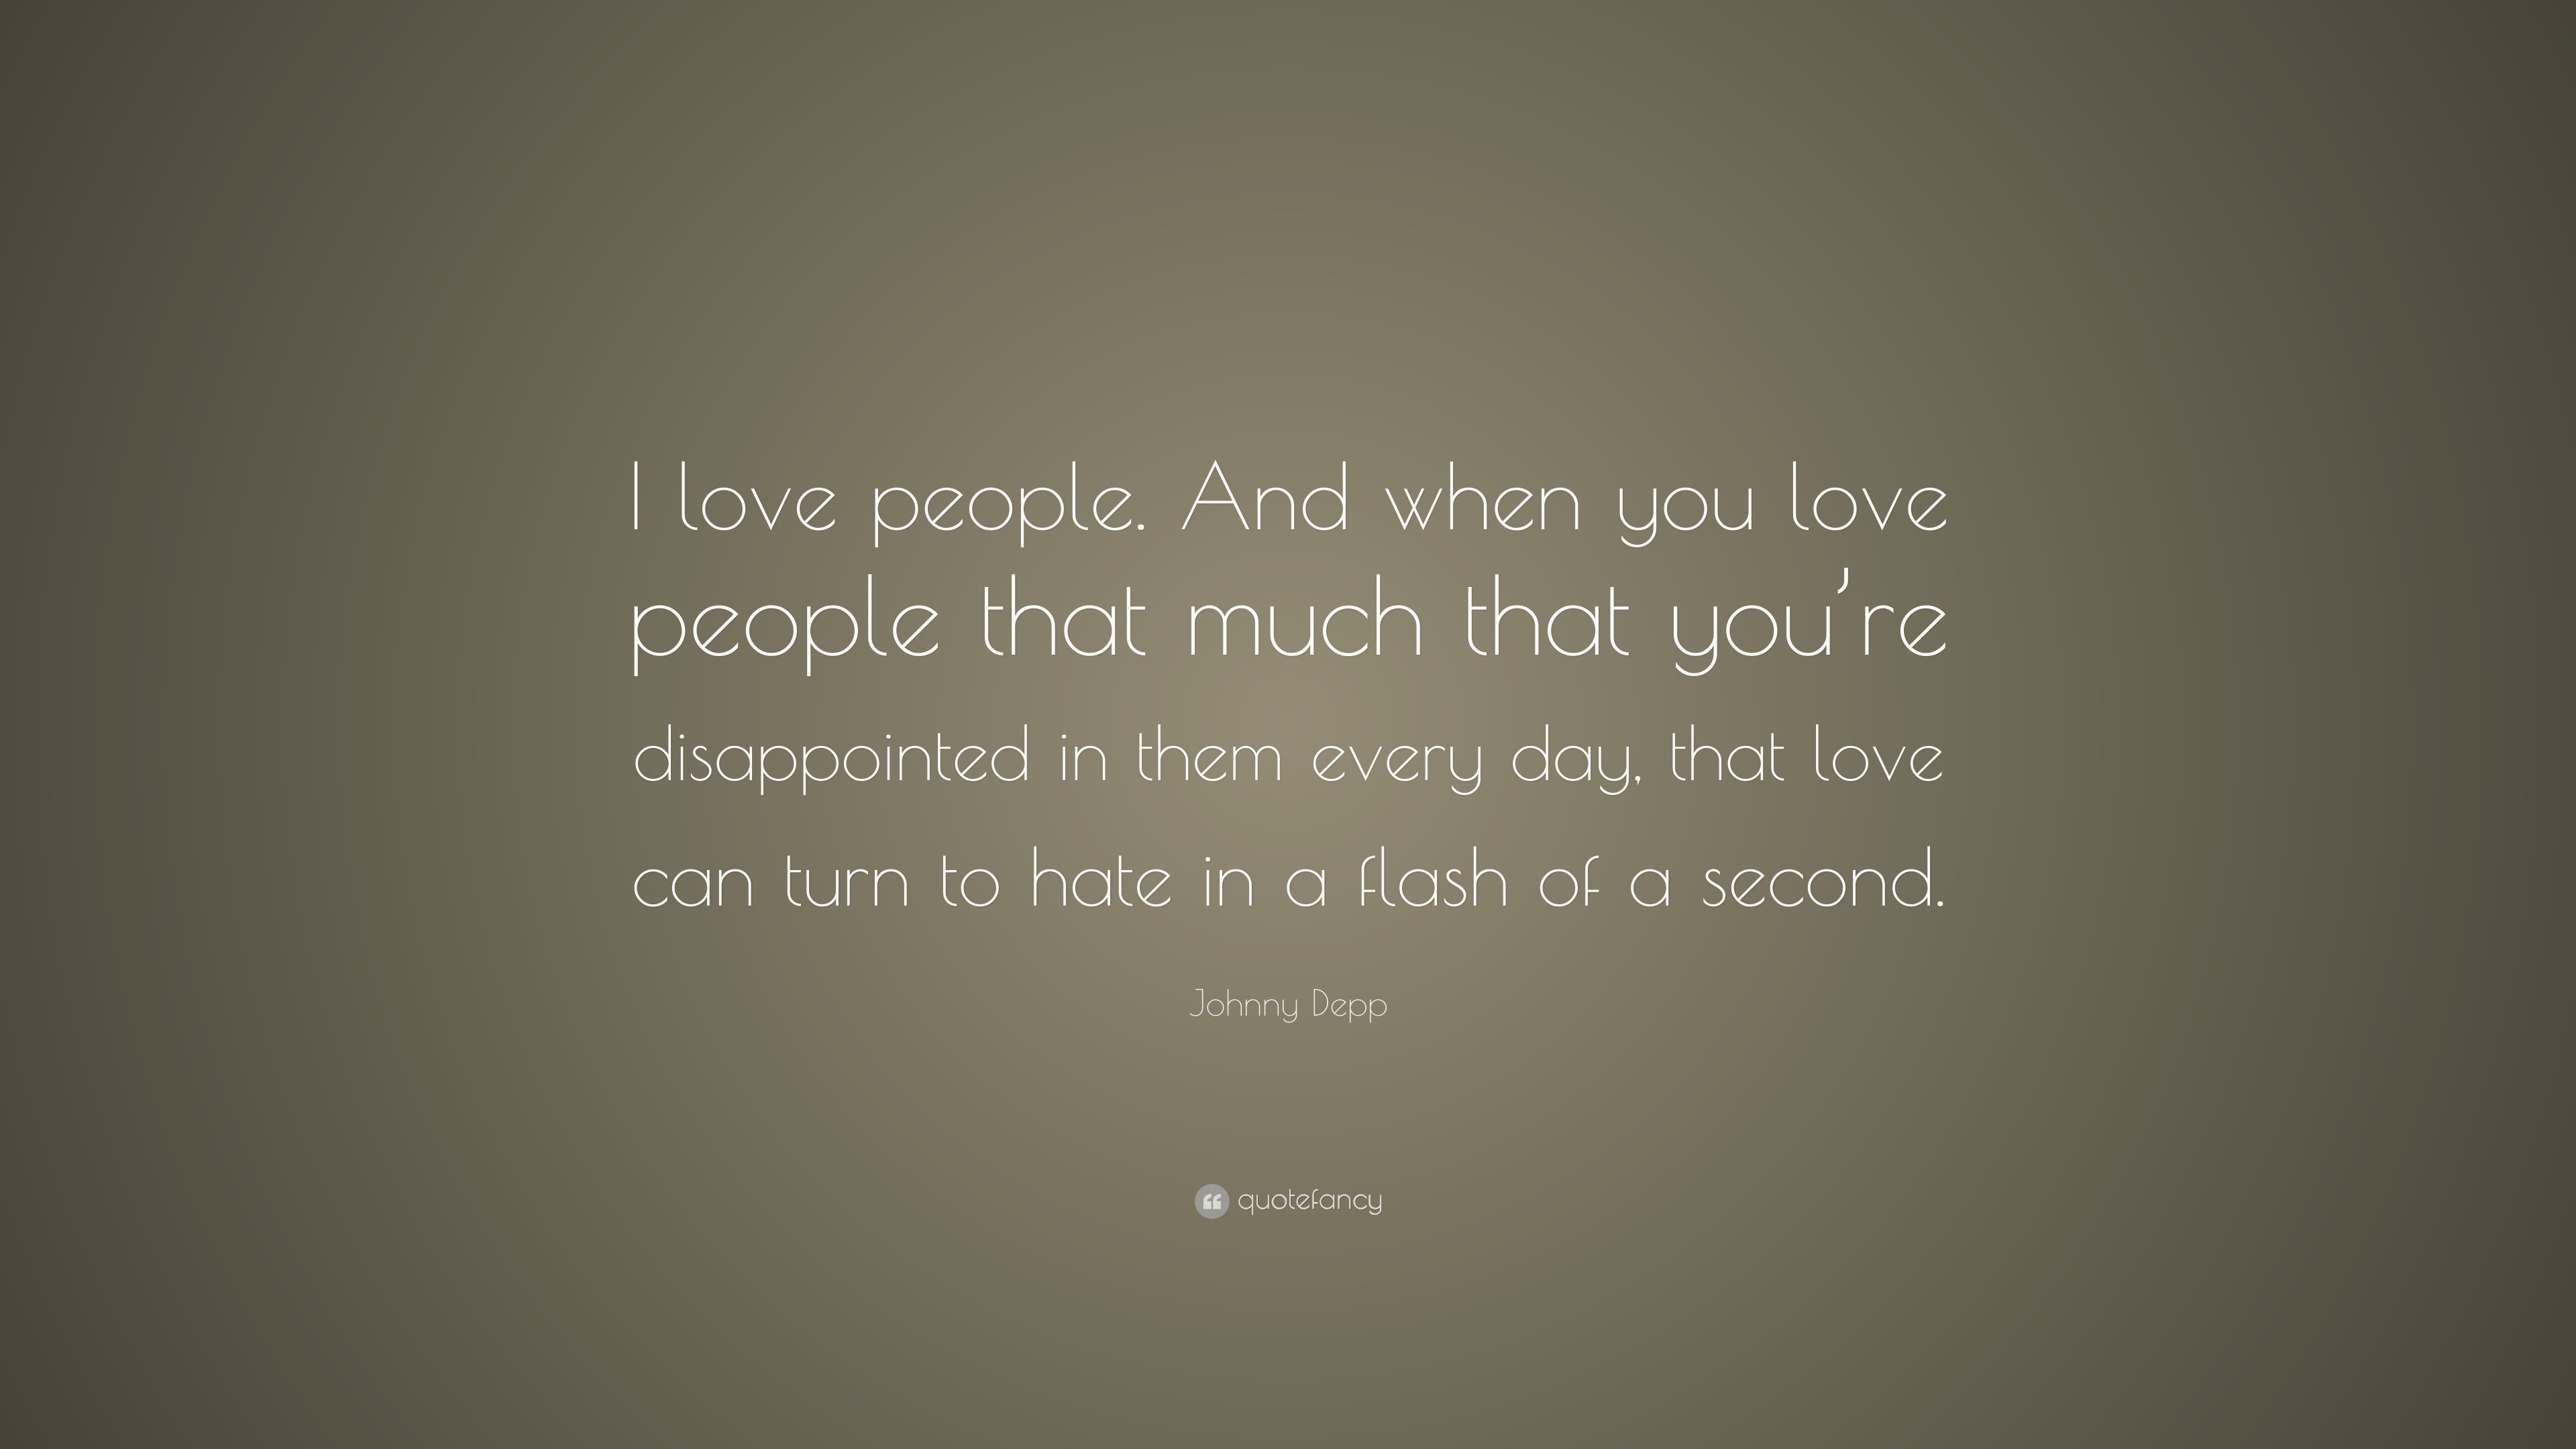 Johnny Depp Quote “I love people And when you love people that much